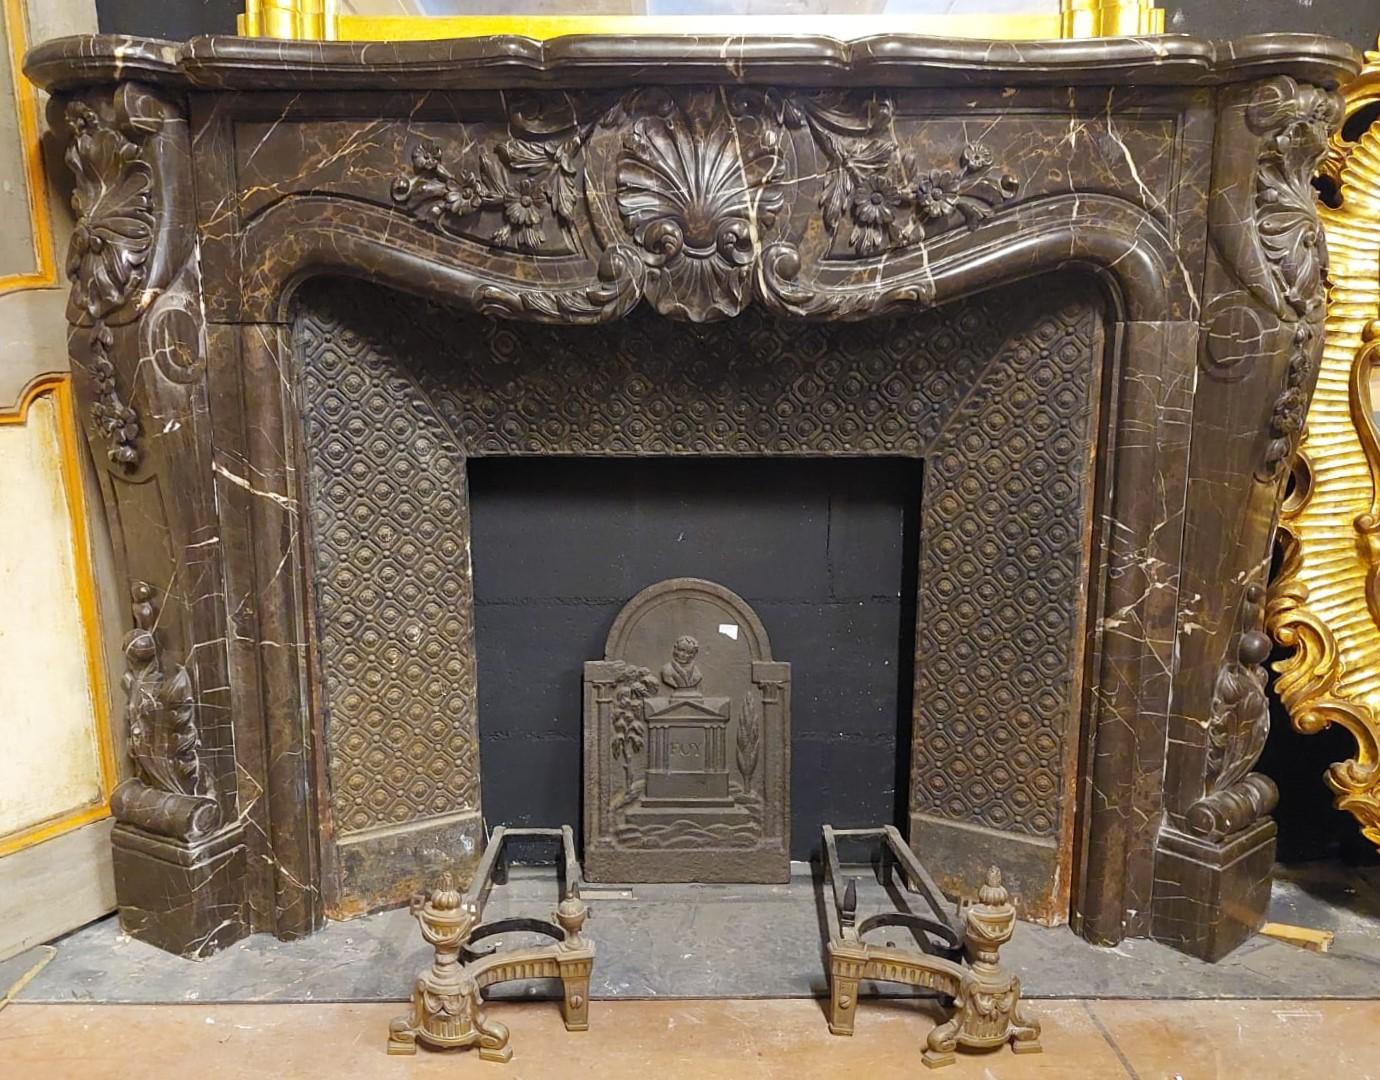 Antique fireplace mantle in black marble, richly carved by hand with central shell and leaves / flowers typical of the time, built by a craftsman in the late 19th century in Italy.
Very rich and of great stage presence, elegant and refined,